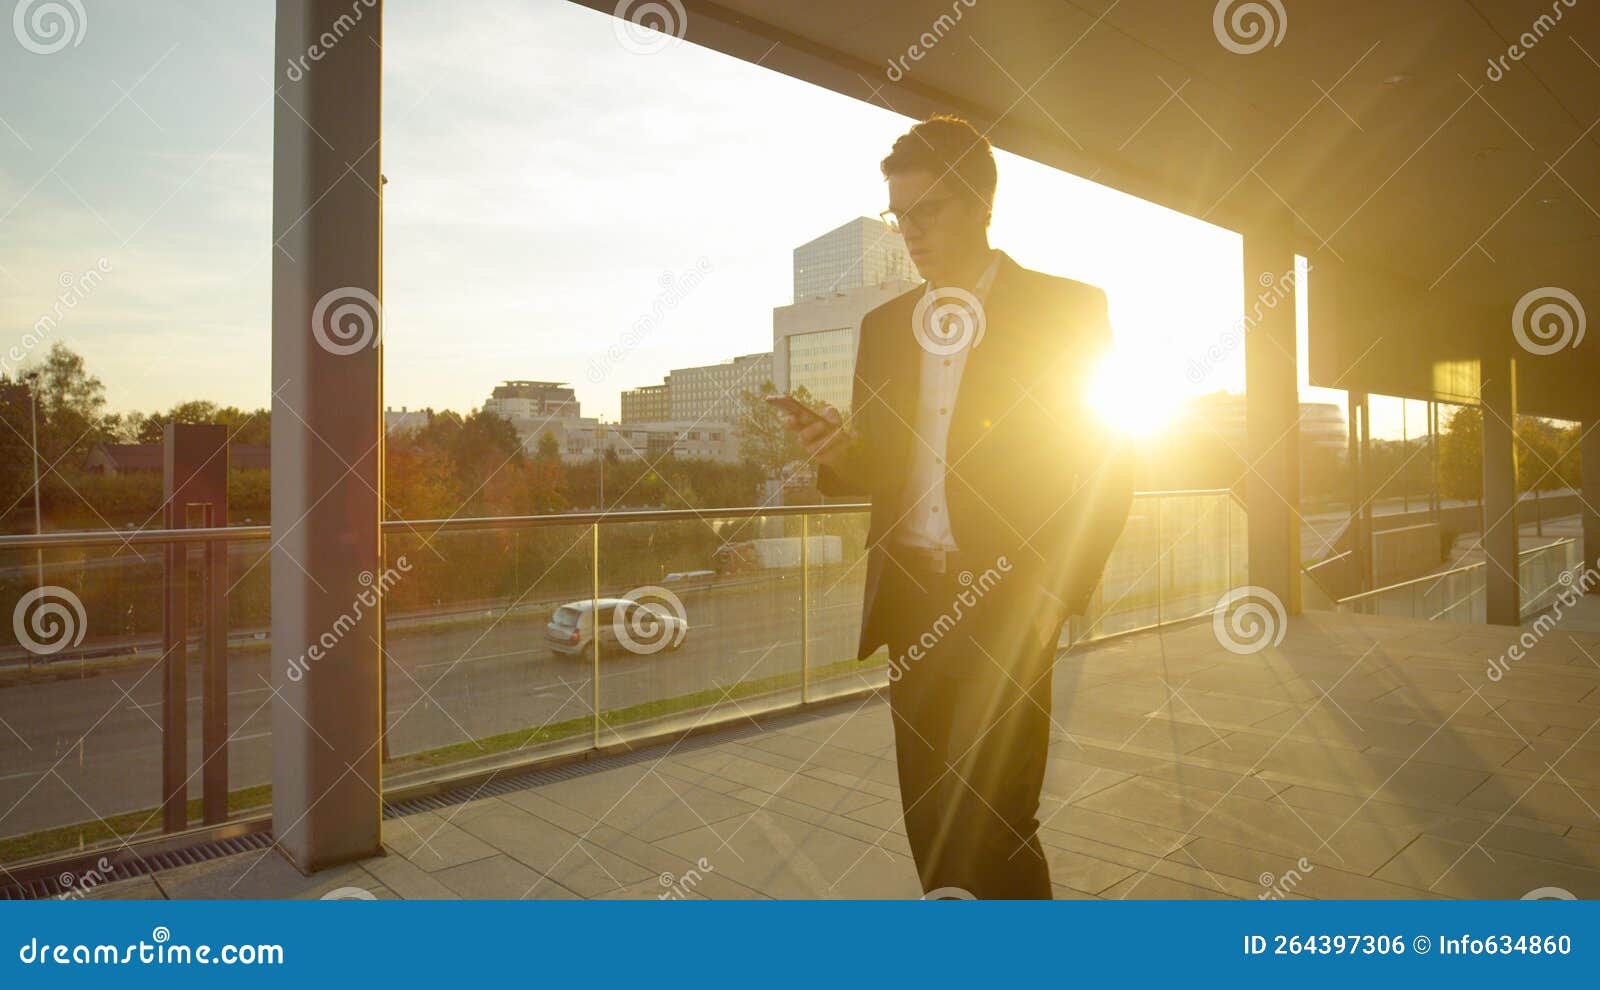 lens flare: young yuppie looks at his smartphone while walking down the street.